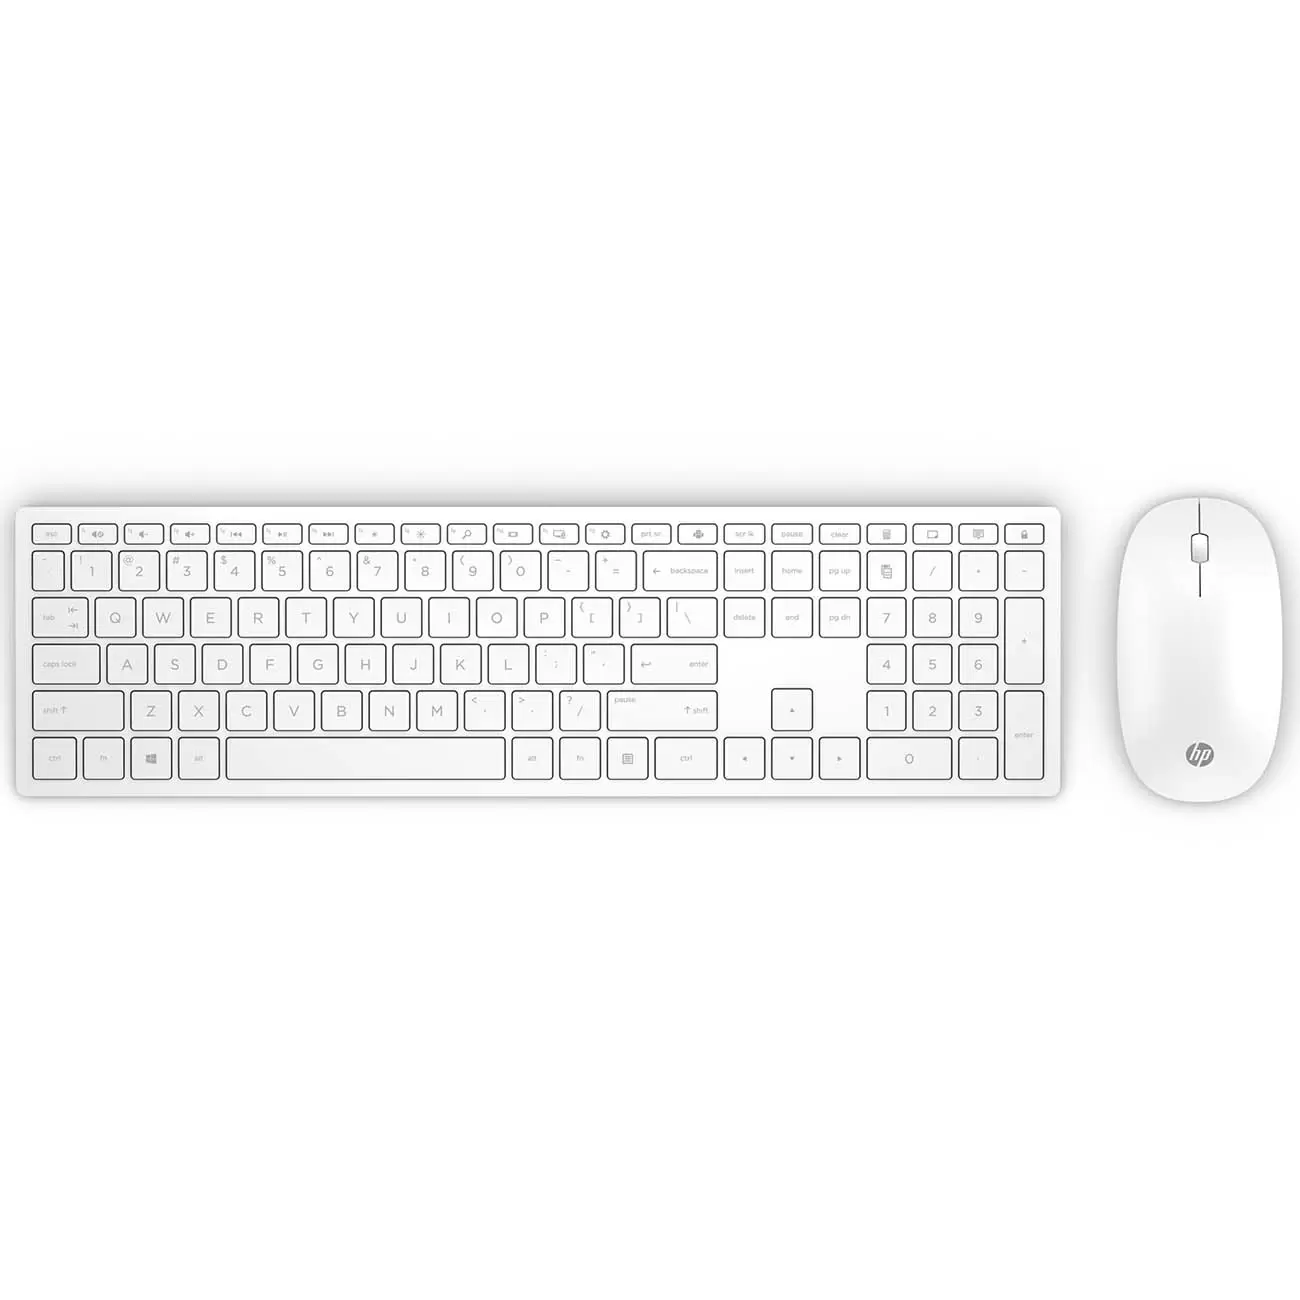 HP Pavilion Wireless Keyboard and Mouse 800 (White) RUSS